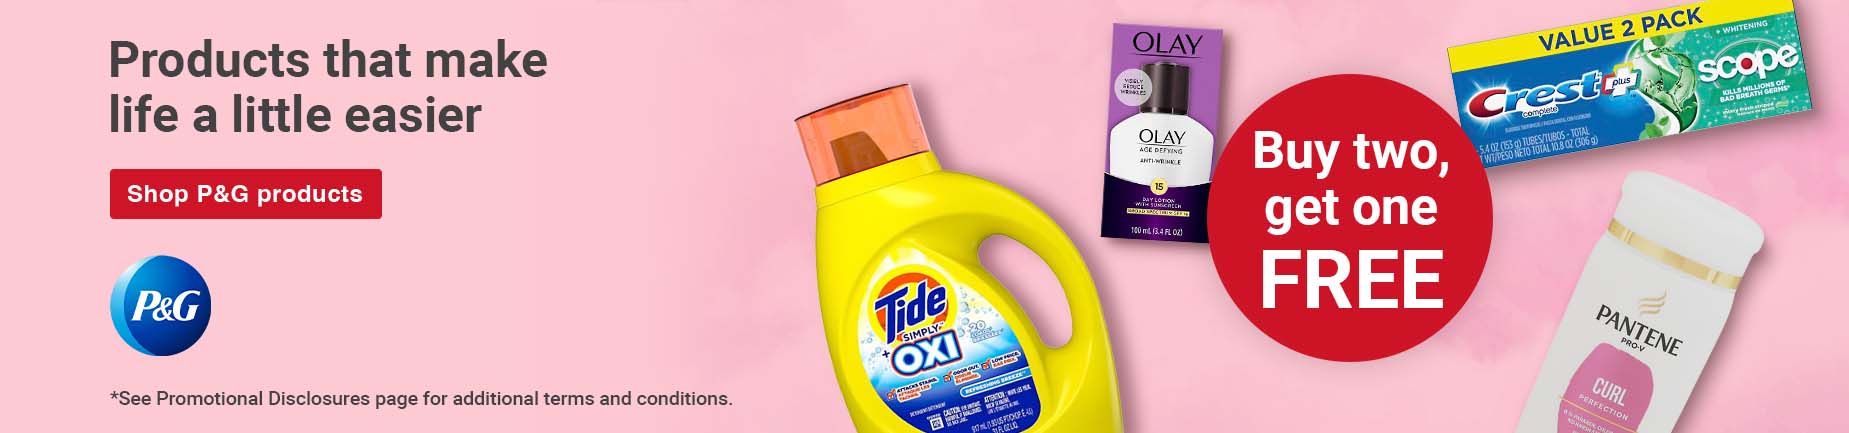 Buy 2, Get 1 Free: All P&G products